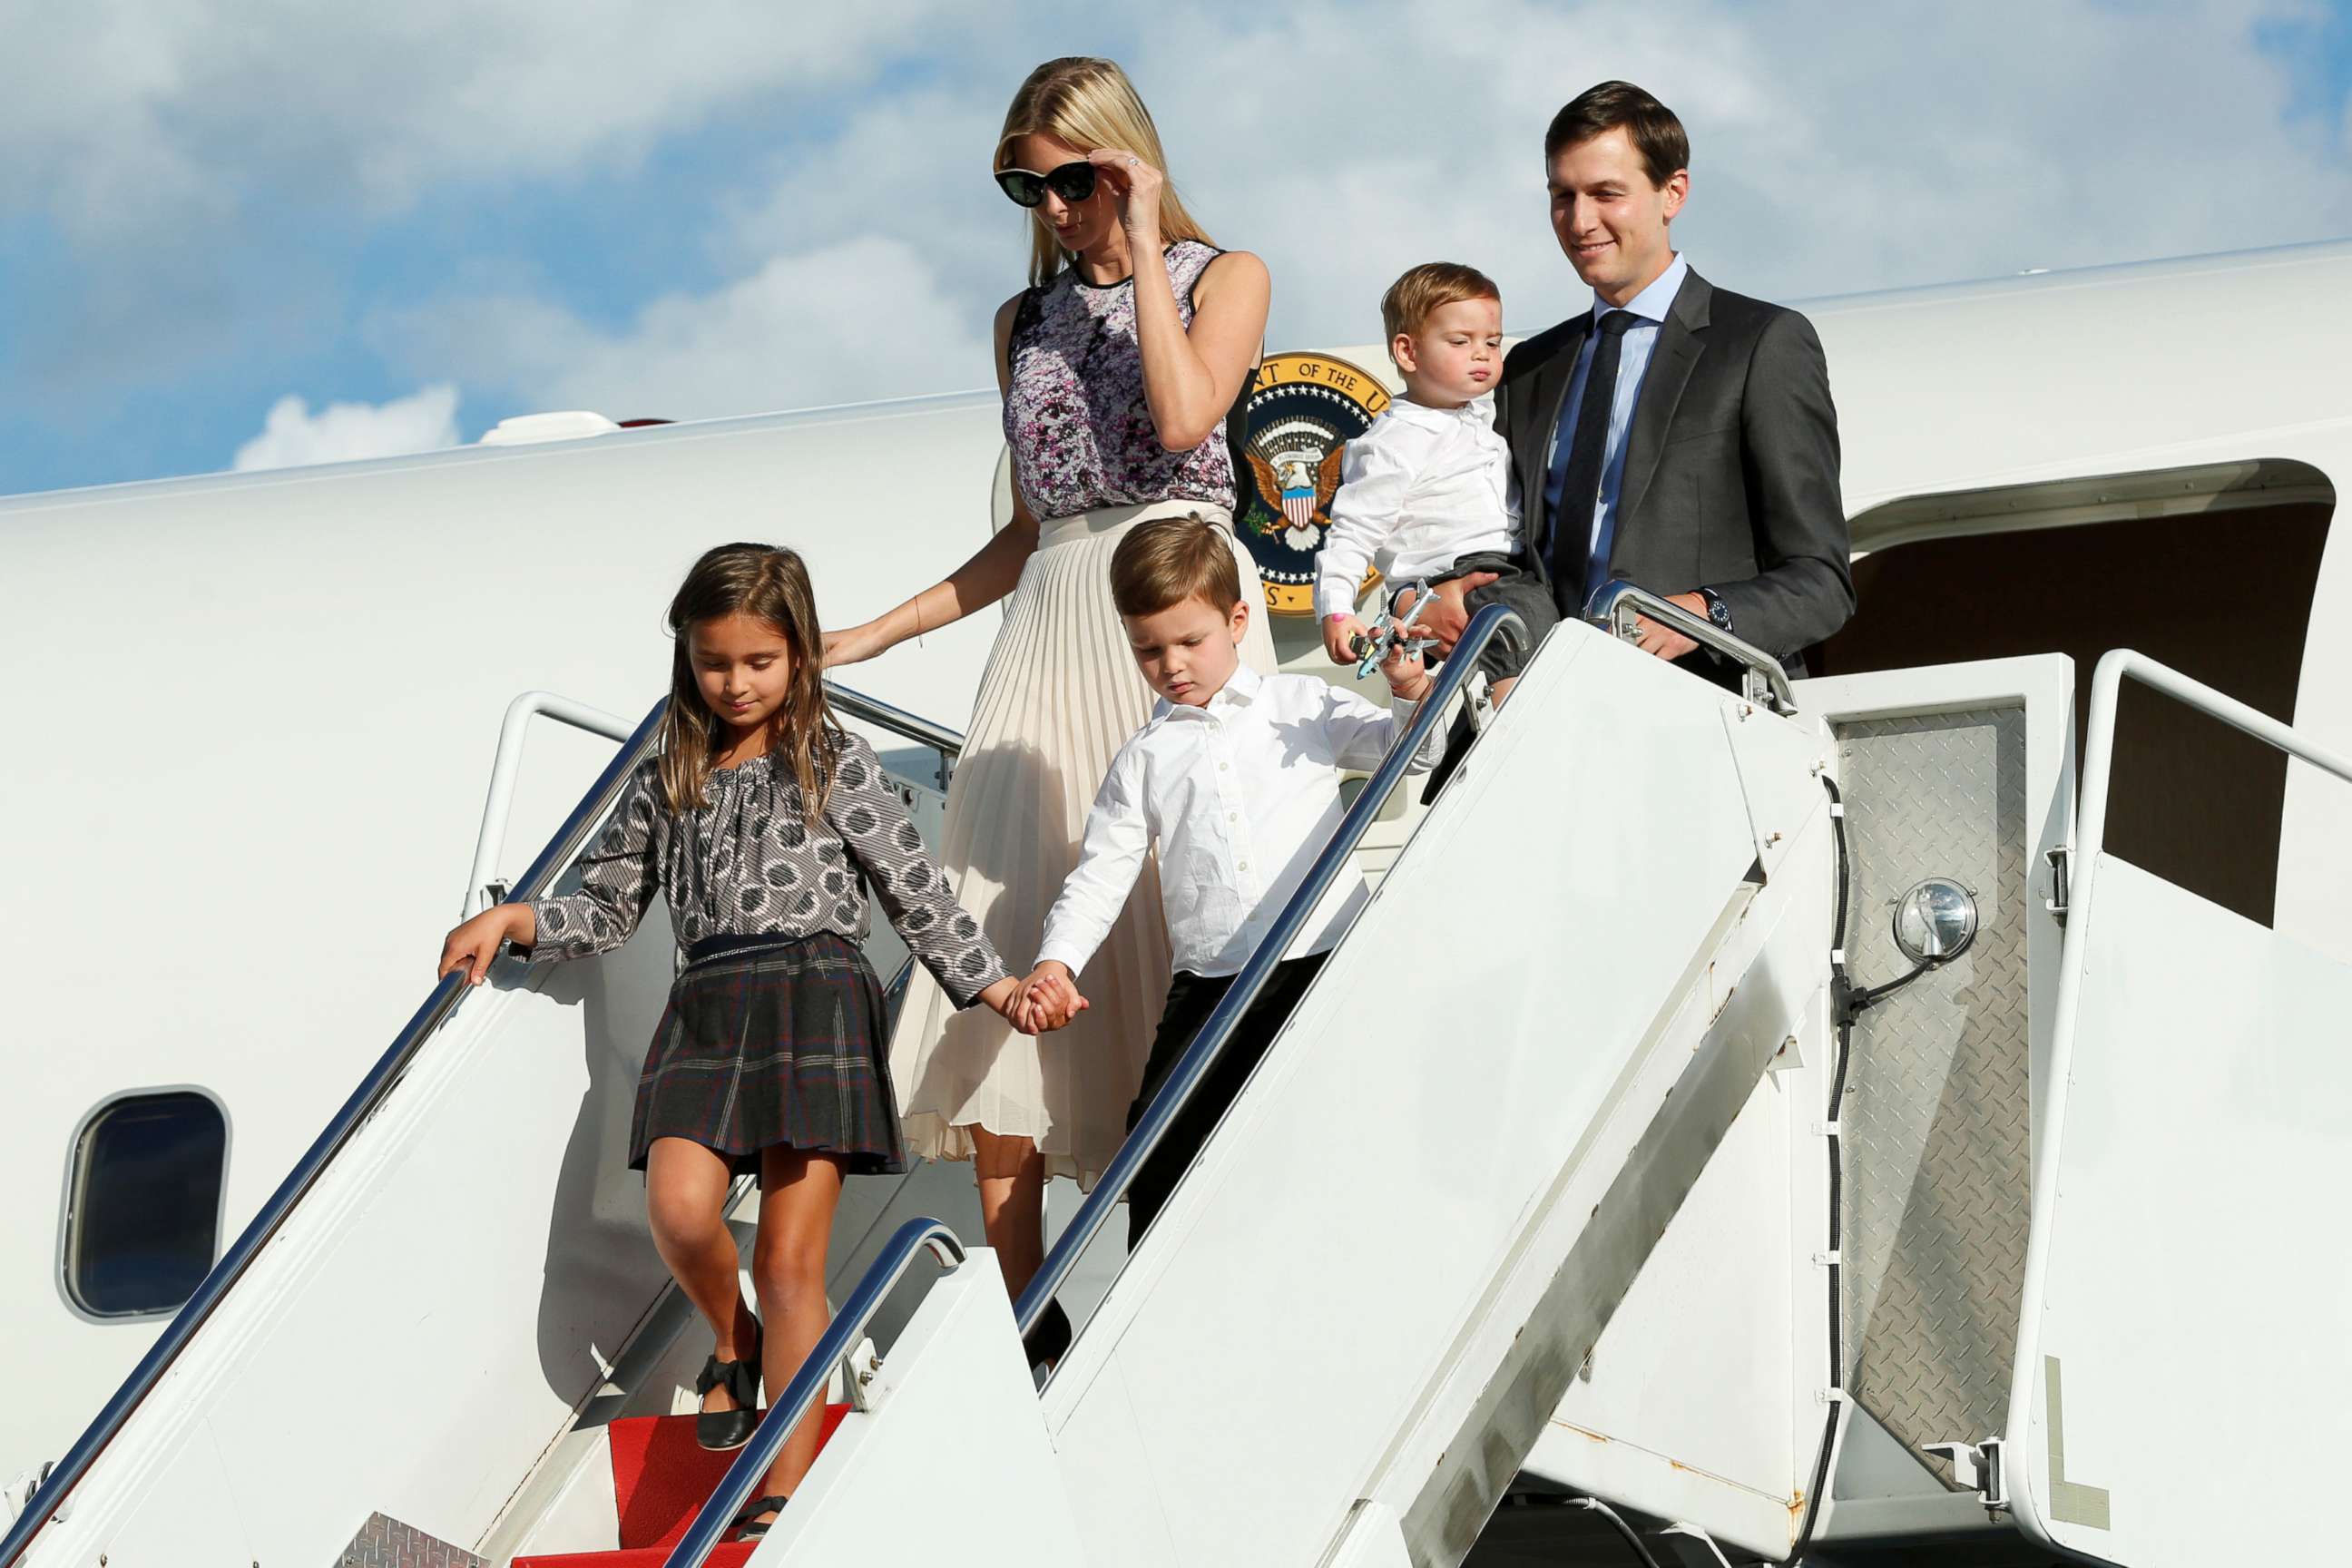 PHOTO: Ivanka Trump with her husband Jared Kushner and their children arrive at Morristown municipal airport, N.J., to spend a weekend with President Donald Trump in Bedminster, Sept. 15, 2017. 